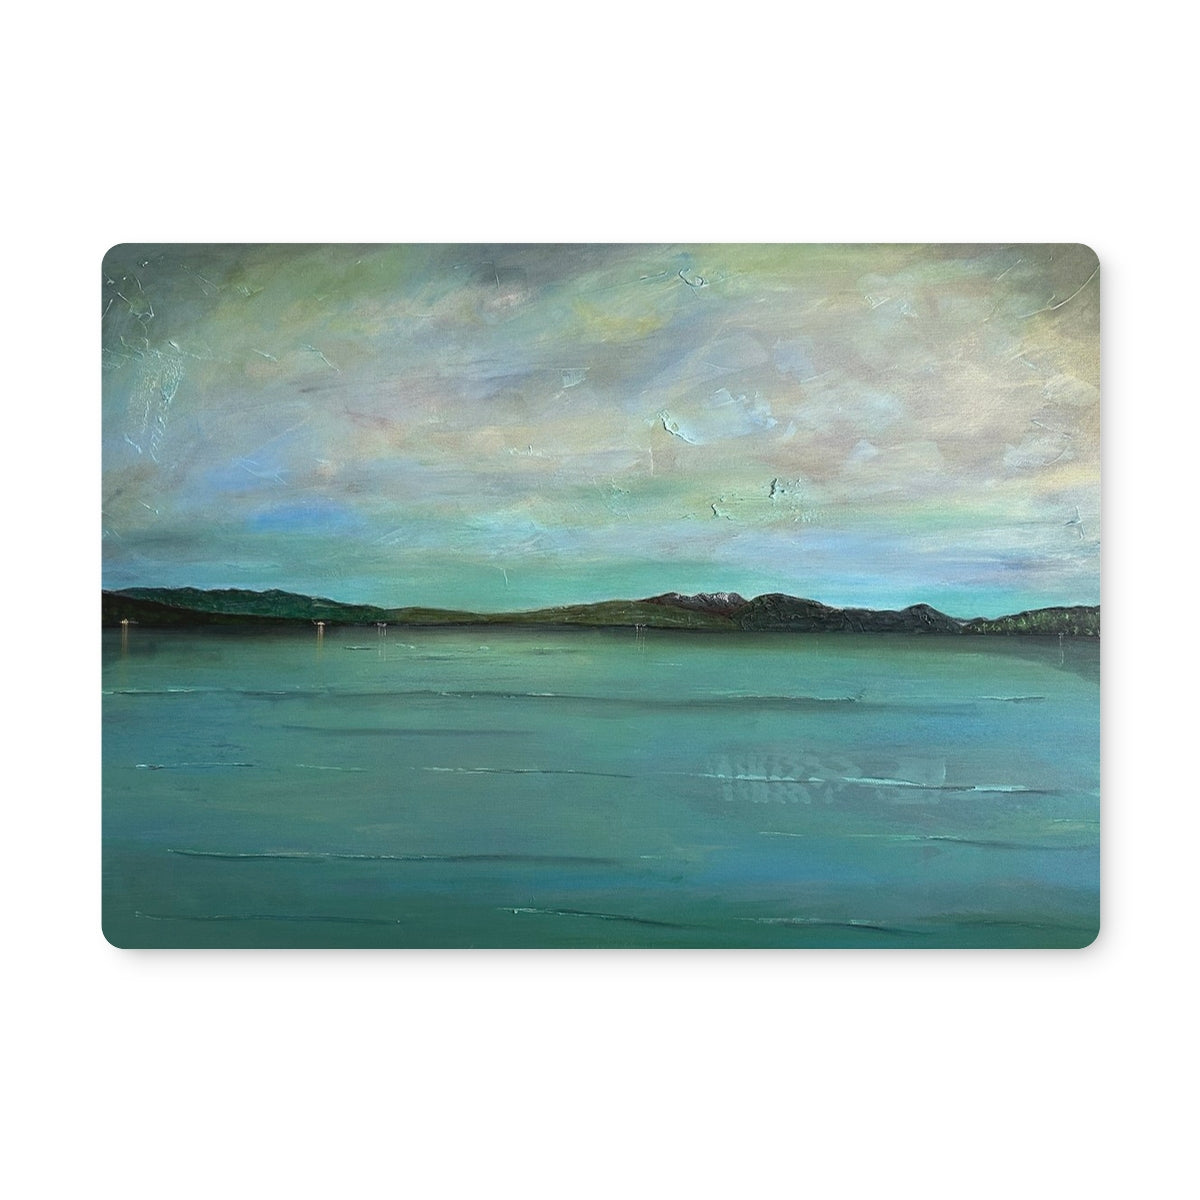 An Ethereal Loch Lomond Art Gifts Placemat-Placemats-Scottish Lochs & Mountains Art Gallery-Single Placemat-Paintings, Prints, Homeware, Art Gifts From Scotland By Scottish Artist Kevin Hunter